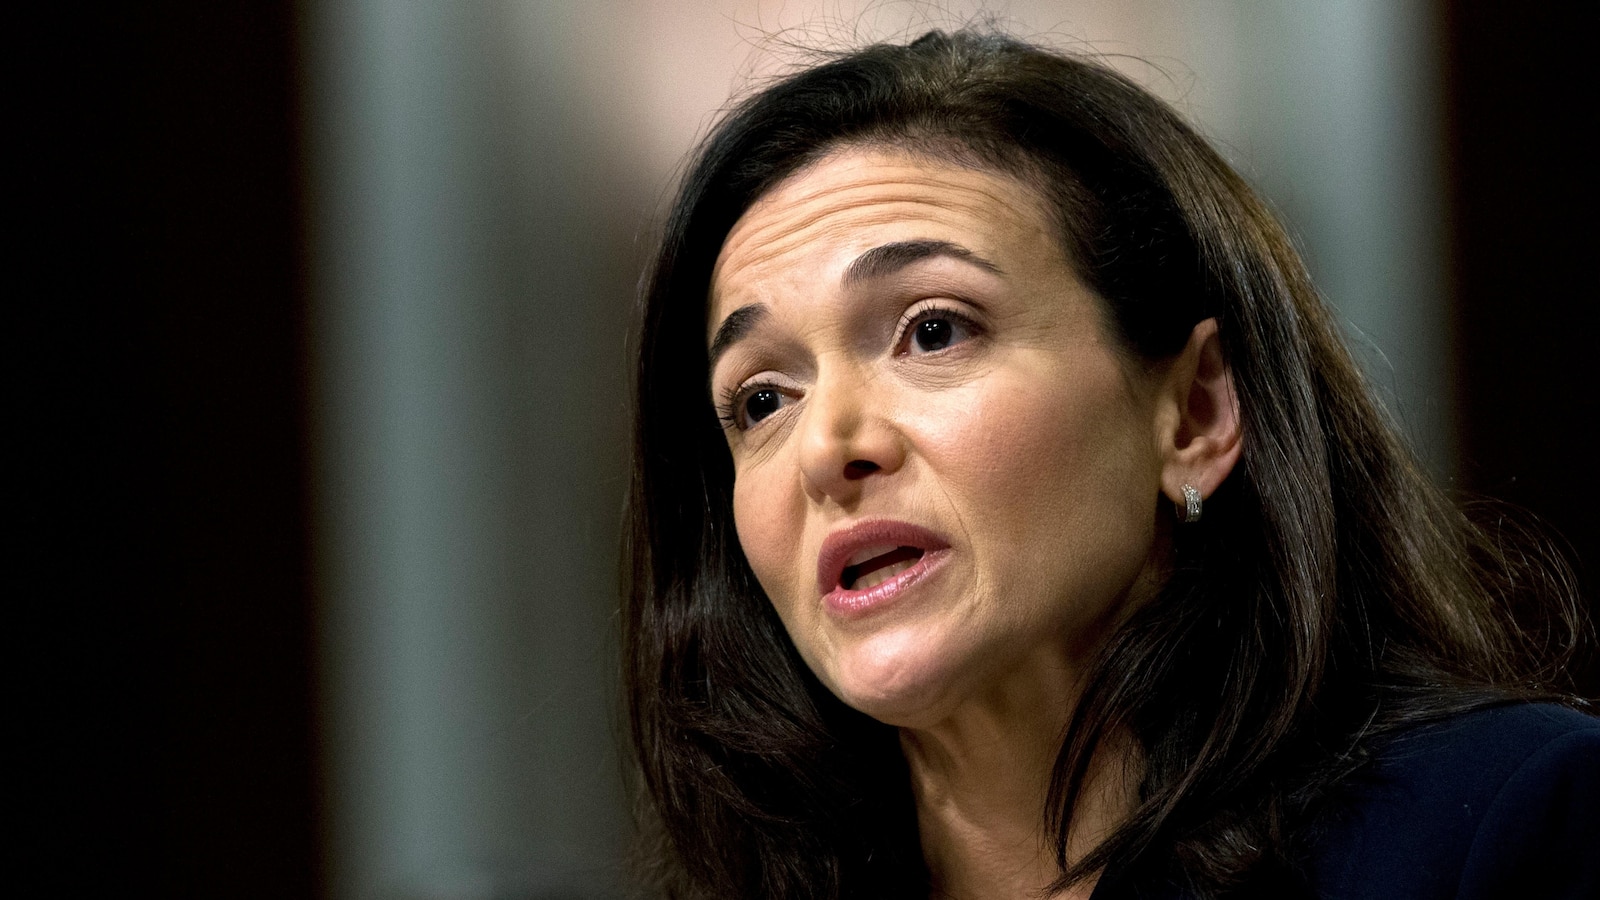 Sandberg, instrumental in Facebook's transformation into a dominant digital advertising powerhouse, announces departure from board